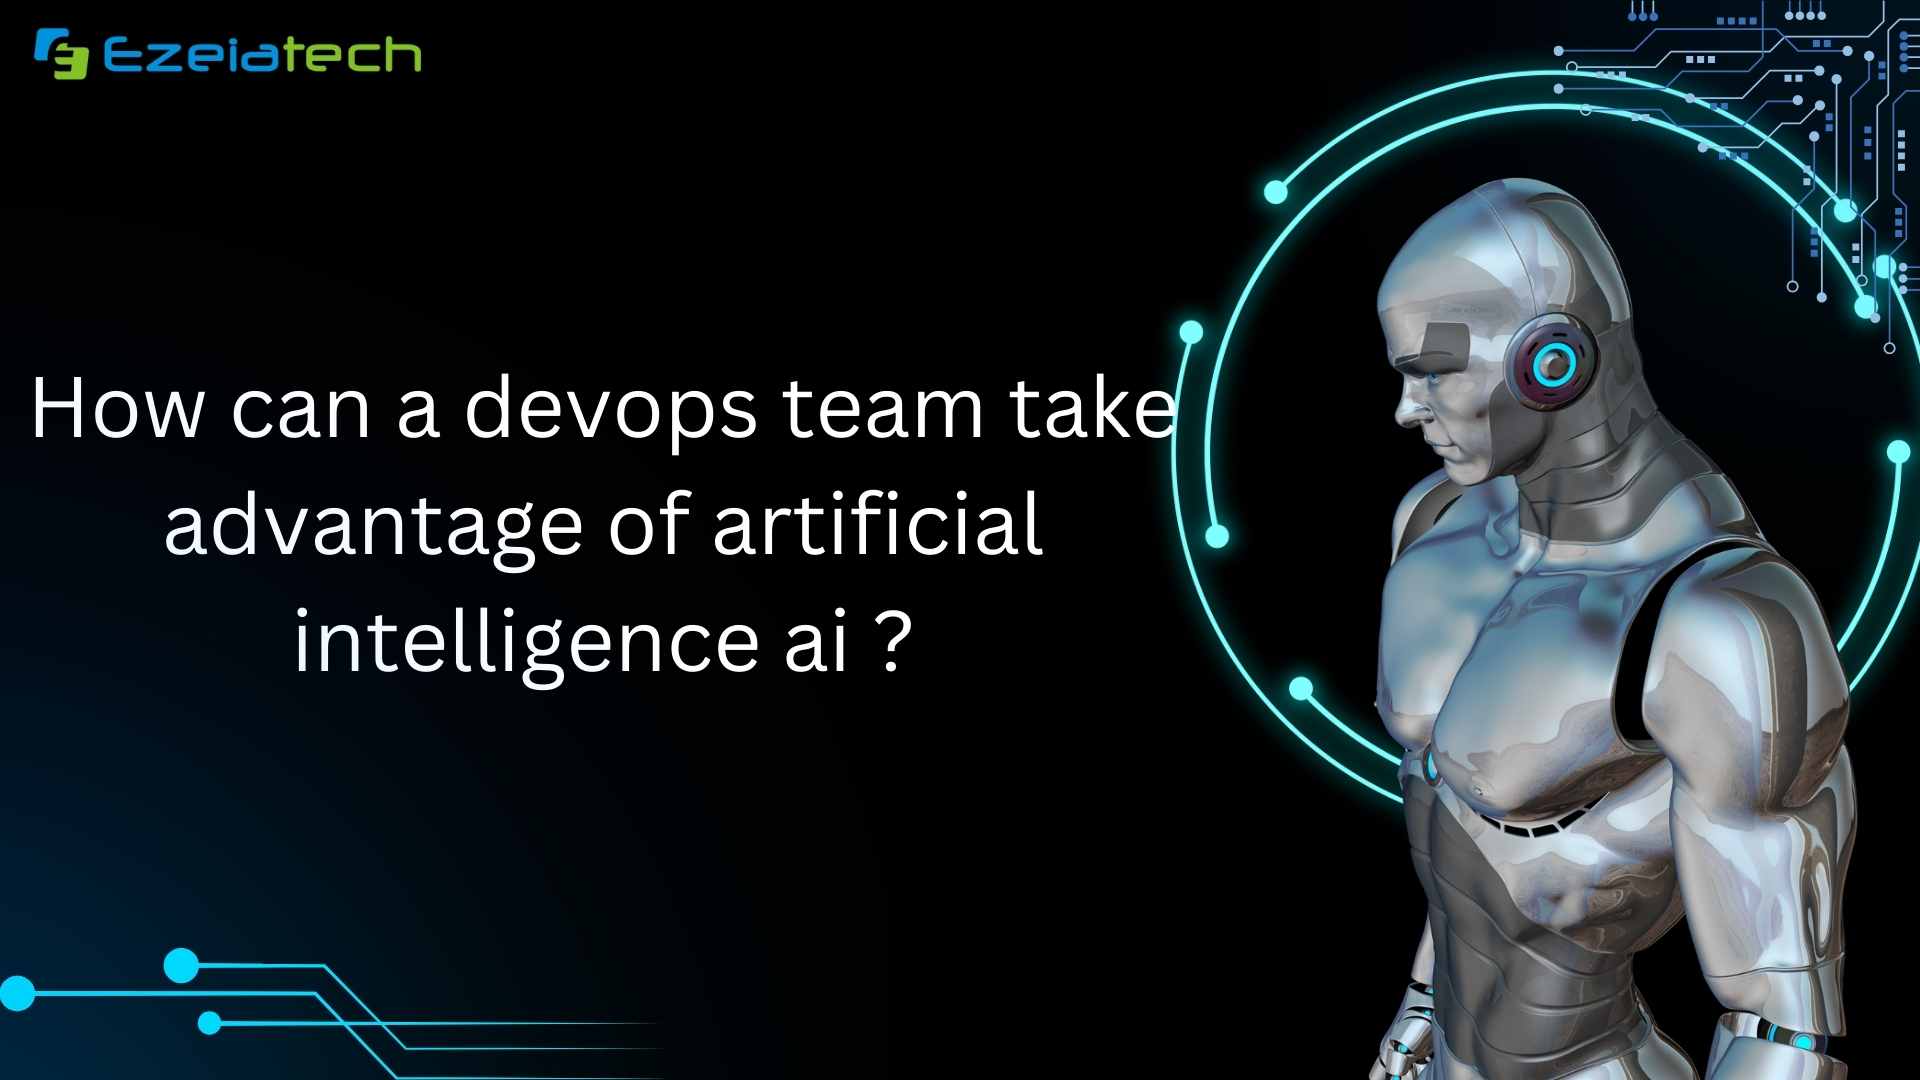 How can a devops team take advantage of artificial intelligence ai?